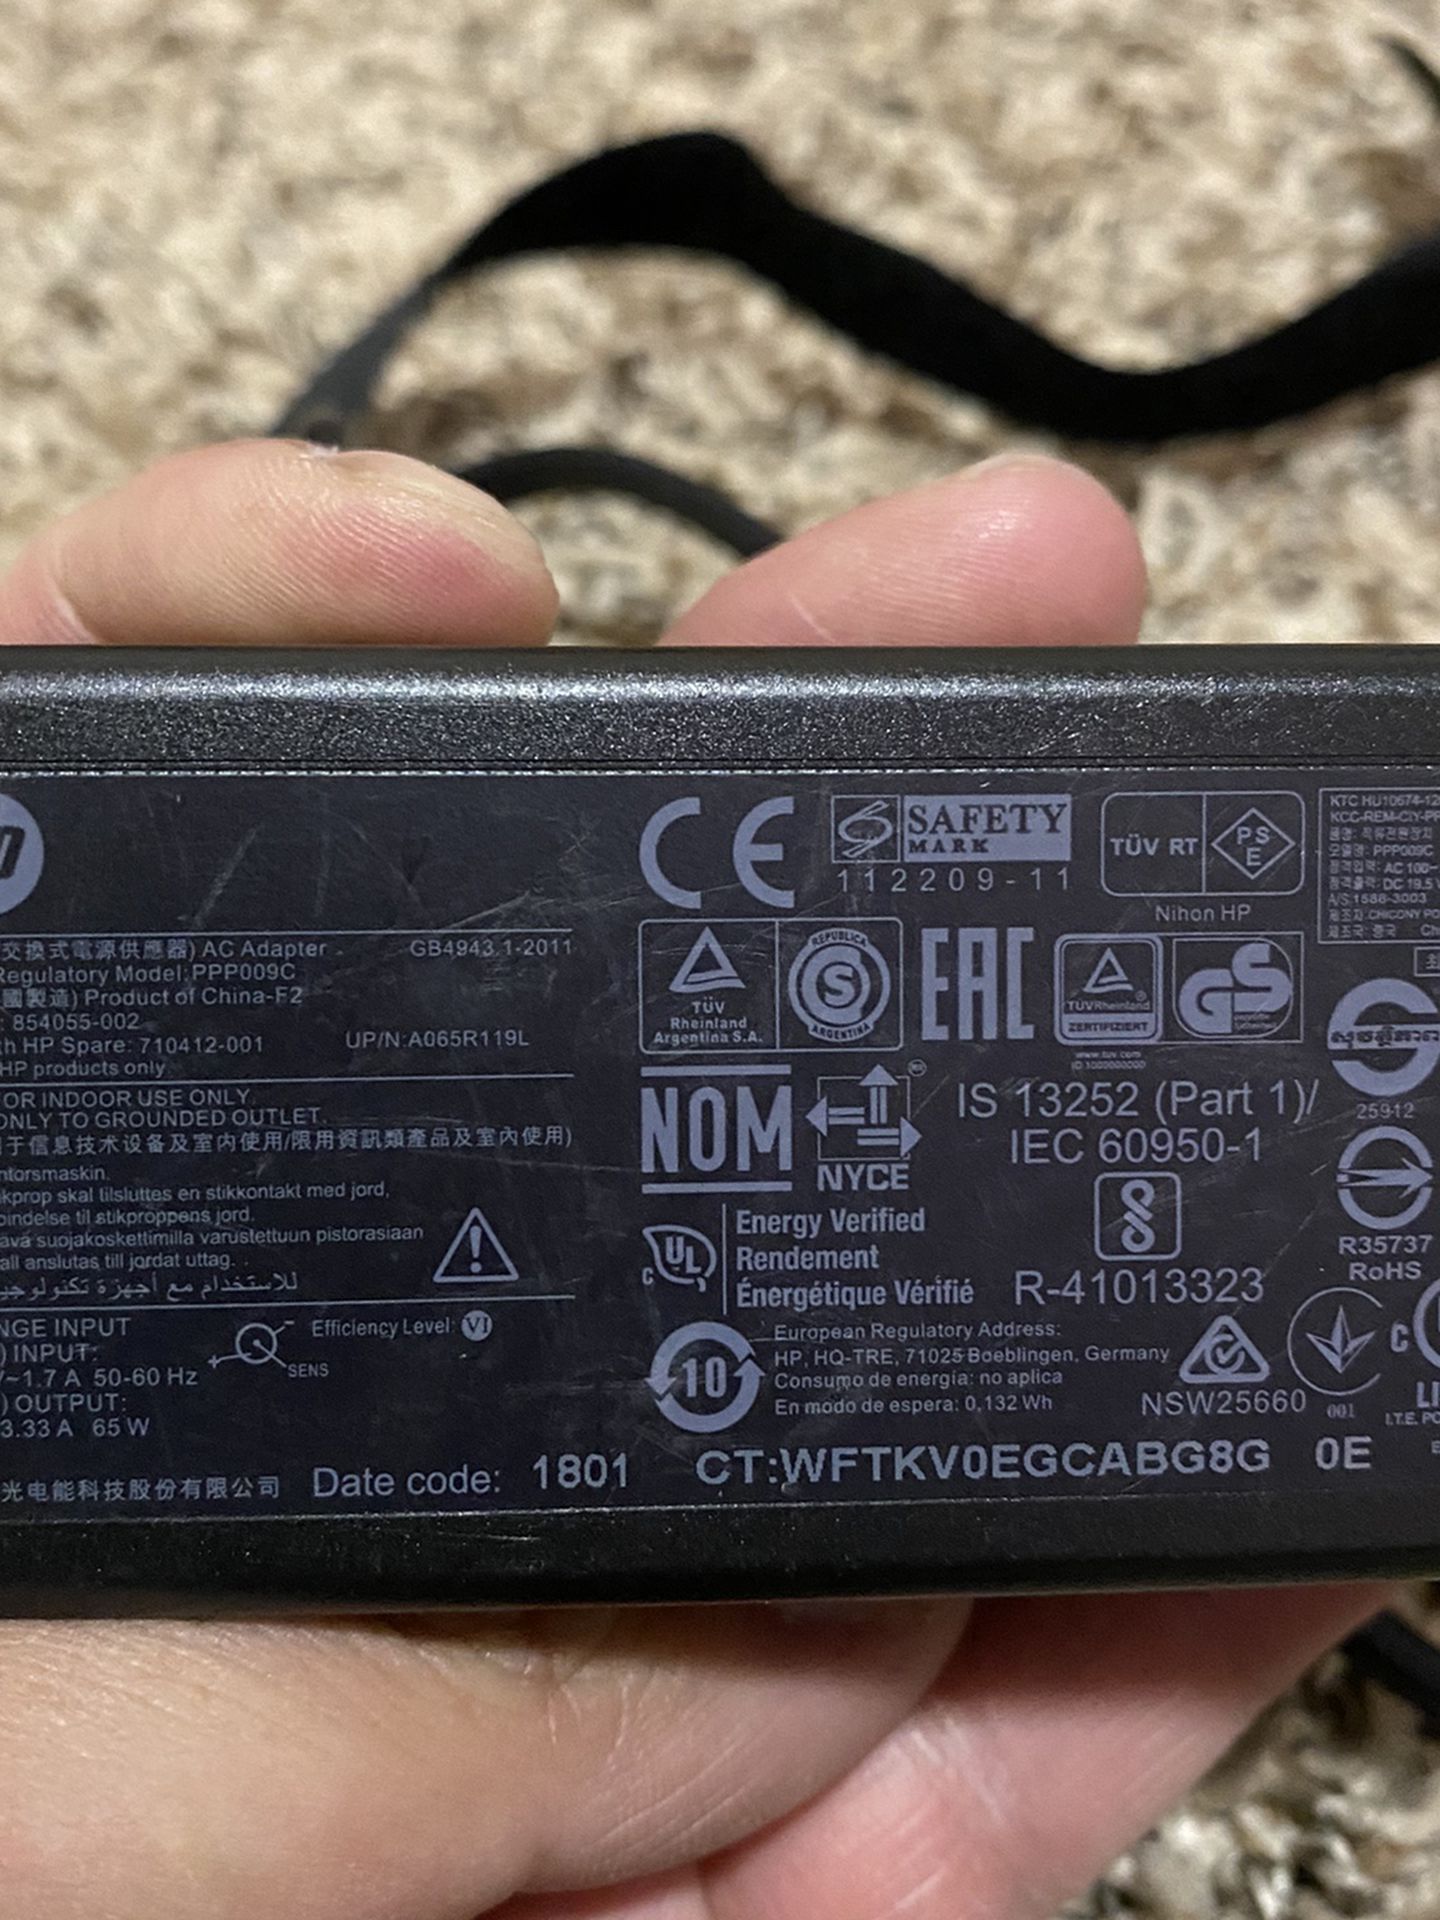 HP Laptop Charger